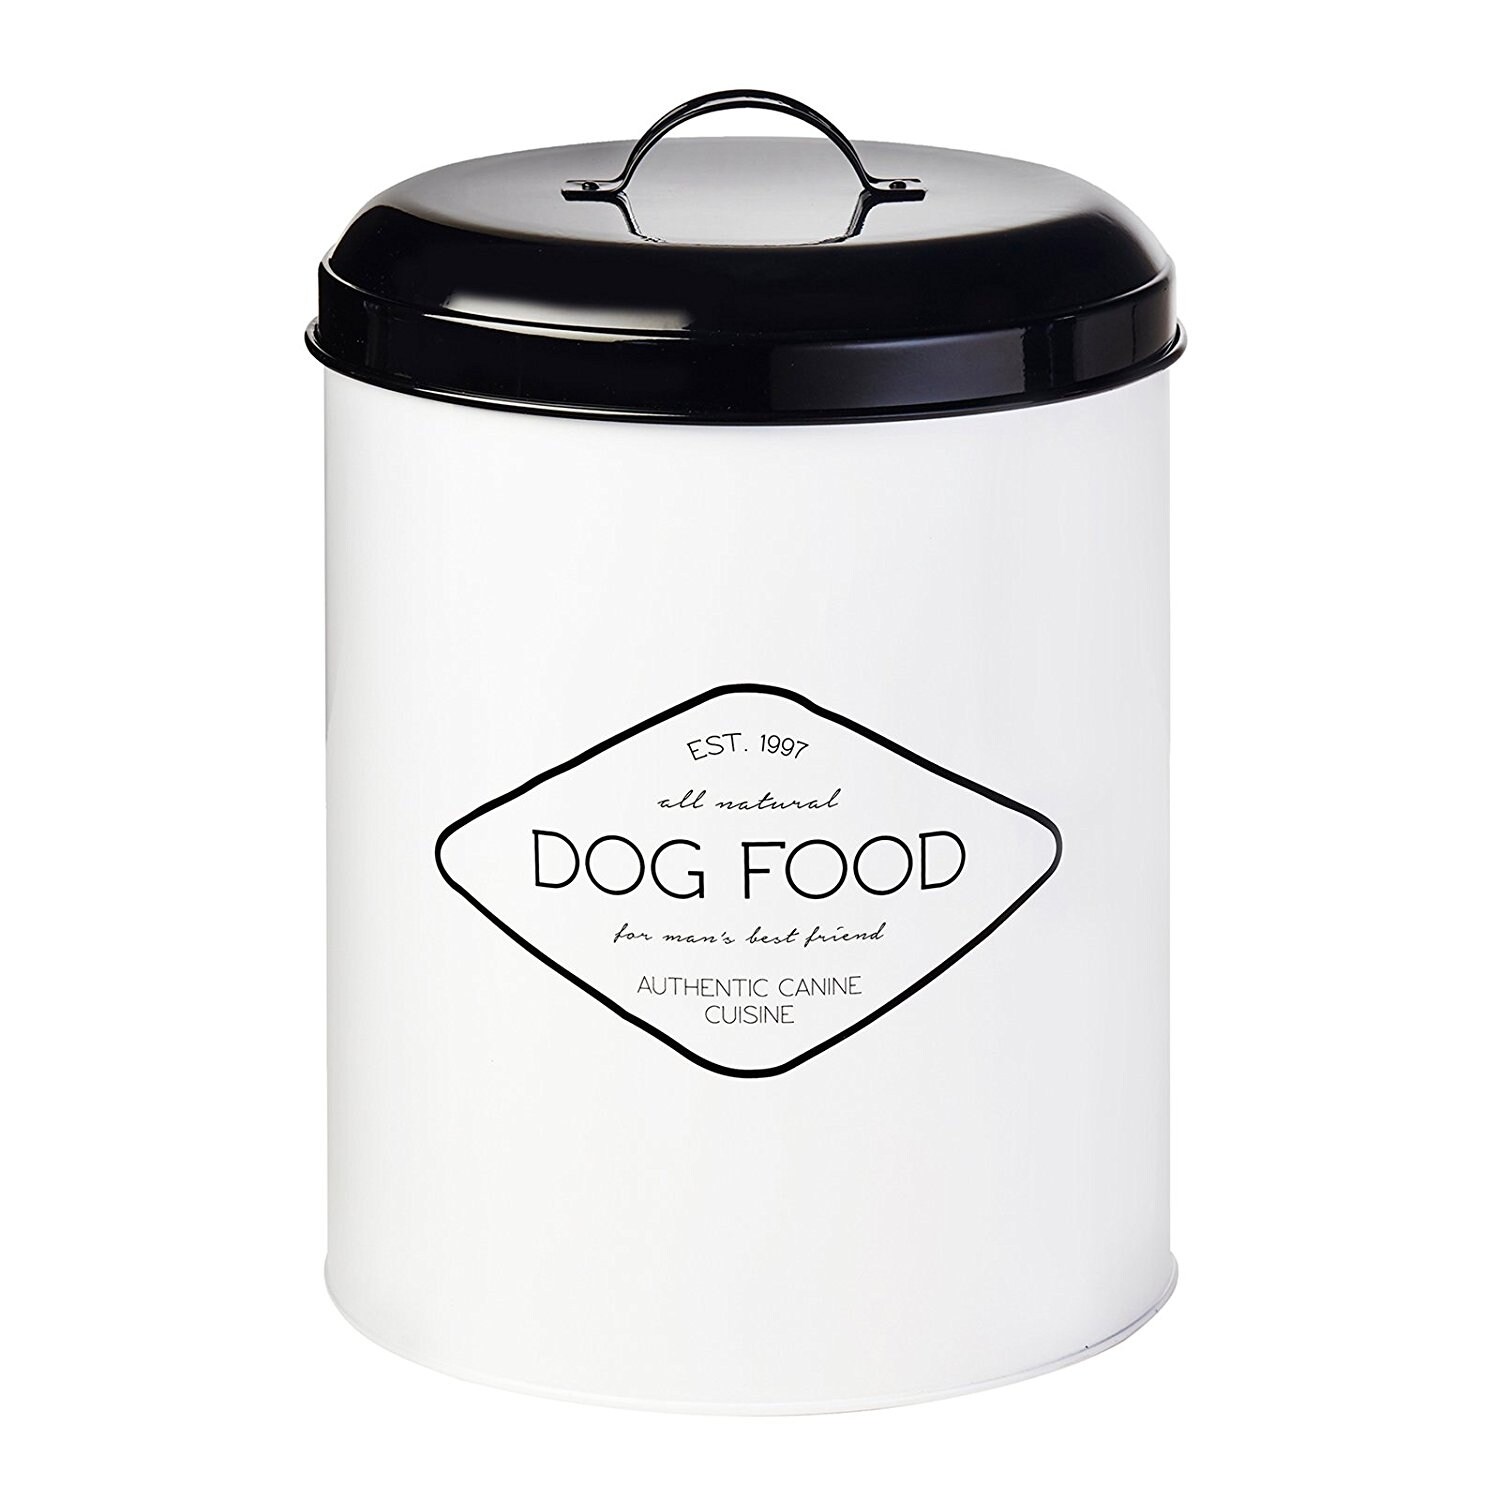 https://ak1.ostkcdn.com/images/products/is/images/direct/a73602d47d1e84eb936b22ea5d1e3cf0e6486c7c/Amici-Pet-Buster-Pet-Treat-Storage-Canister-Jar.jpg